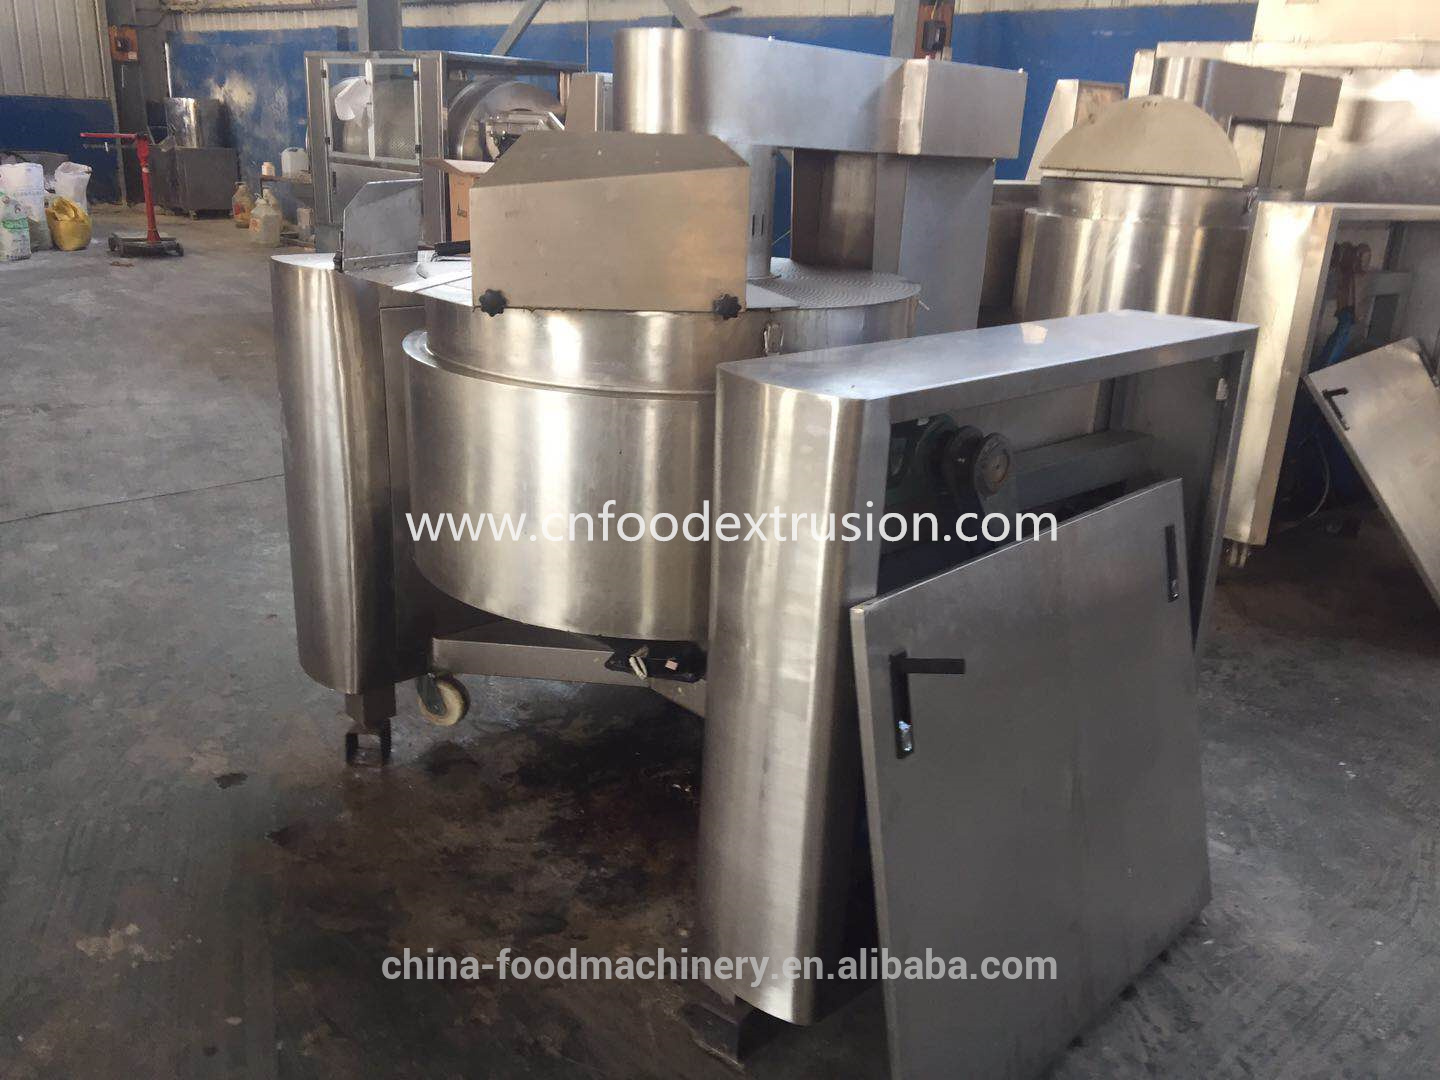 2019 New condition Popcorn making machine industrial from LUERYA 